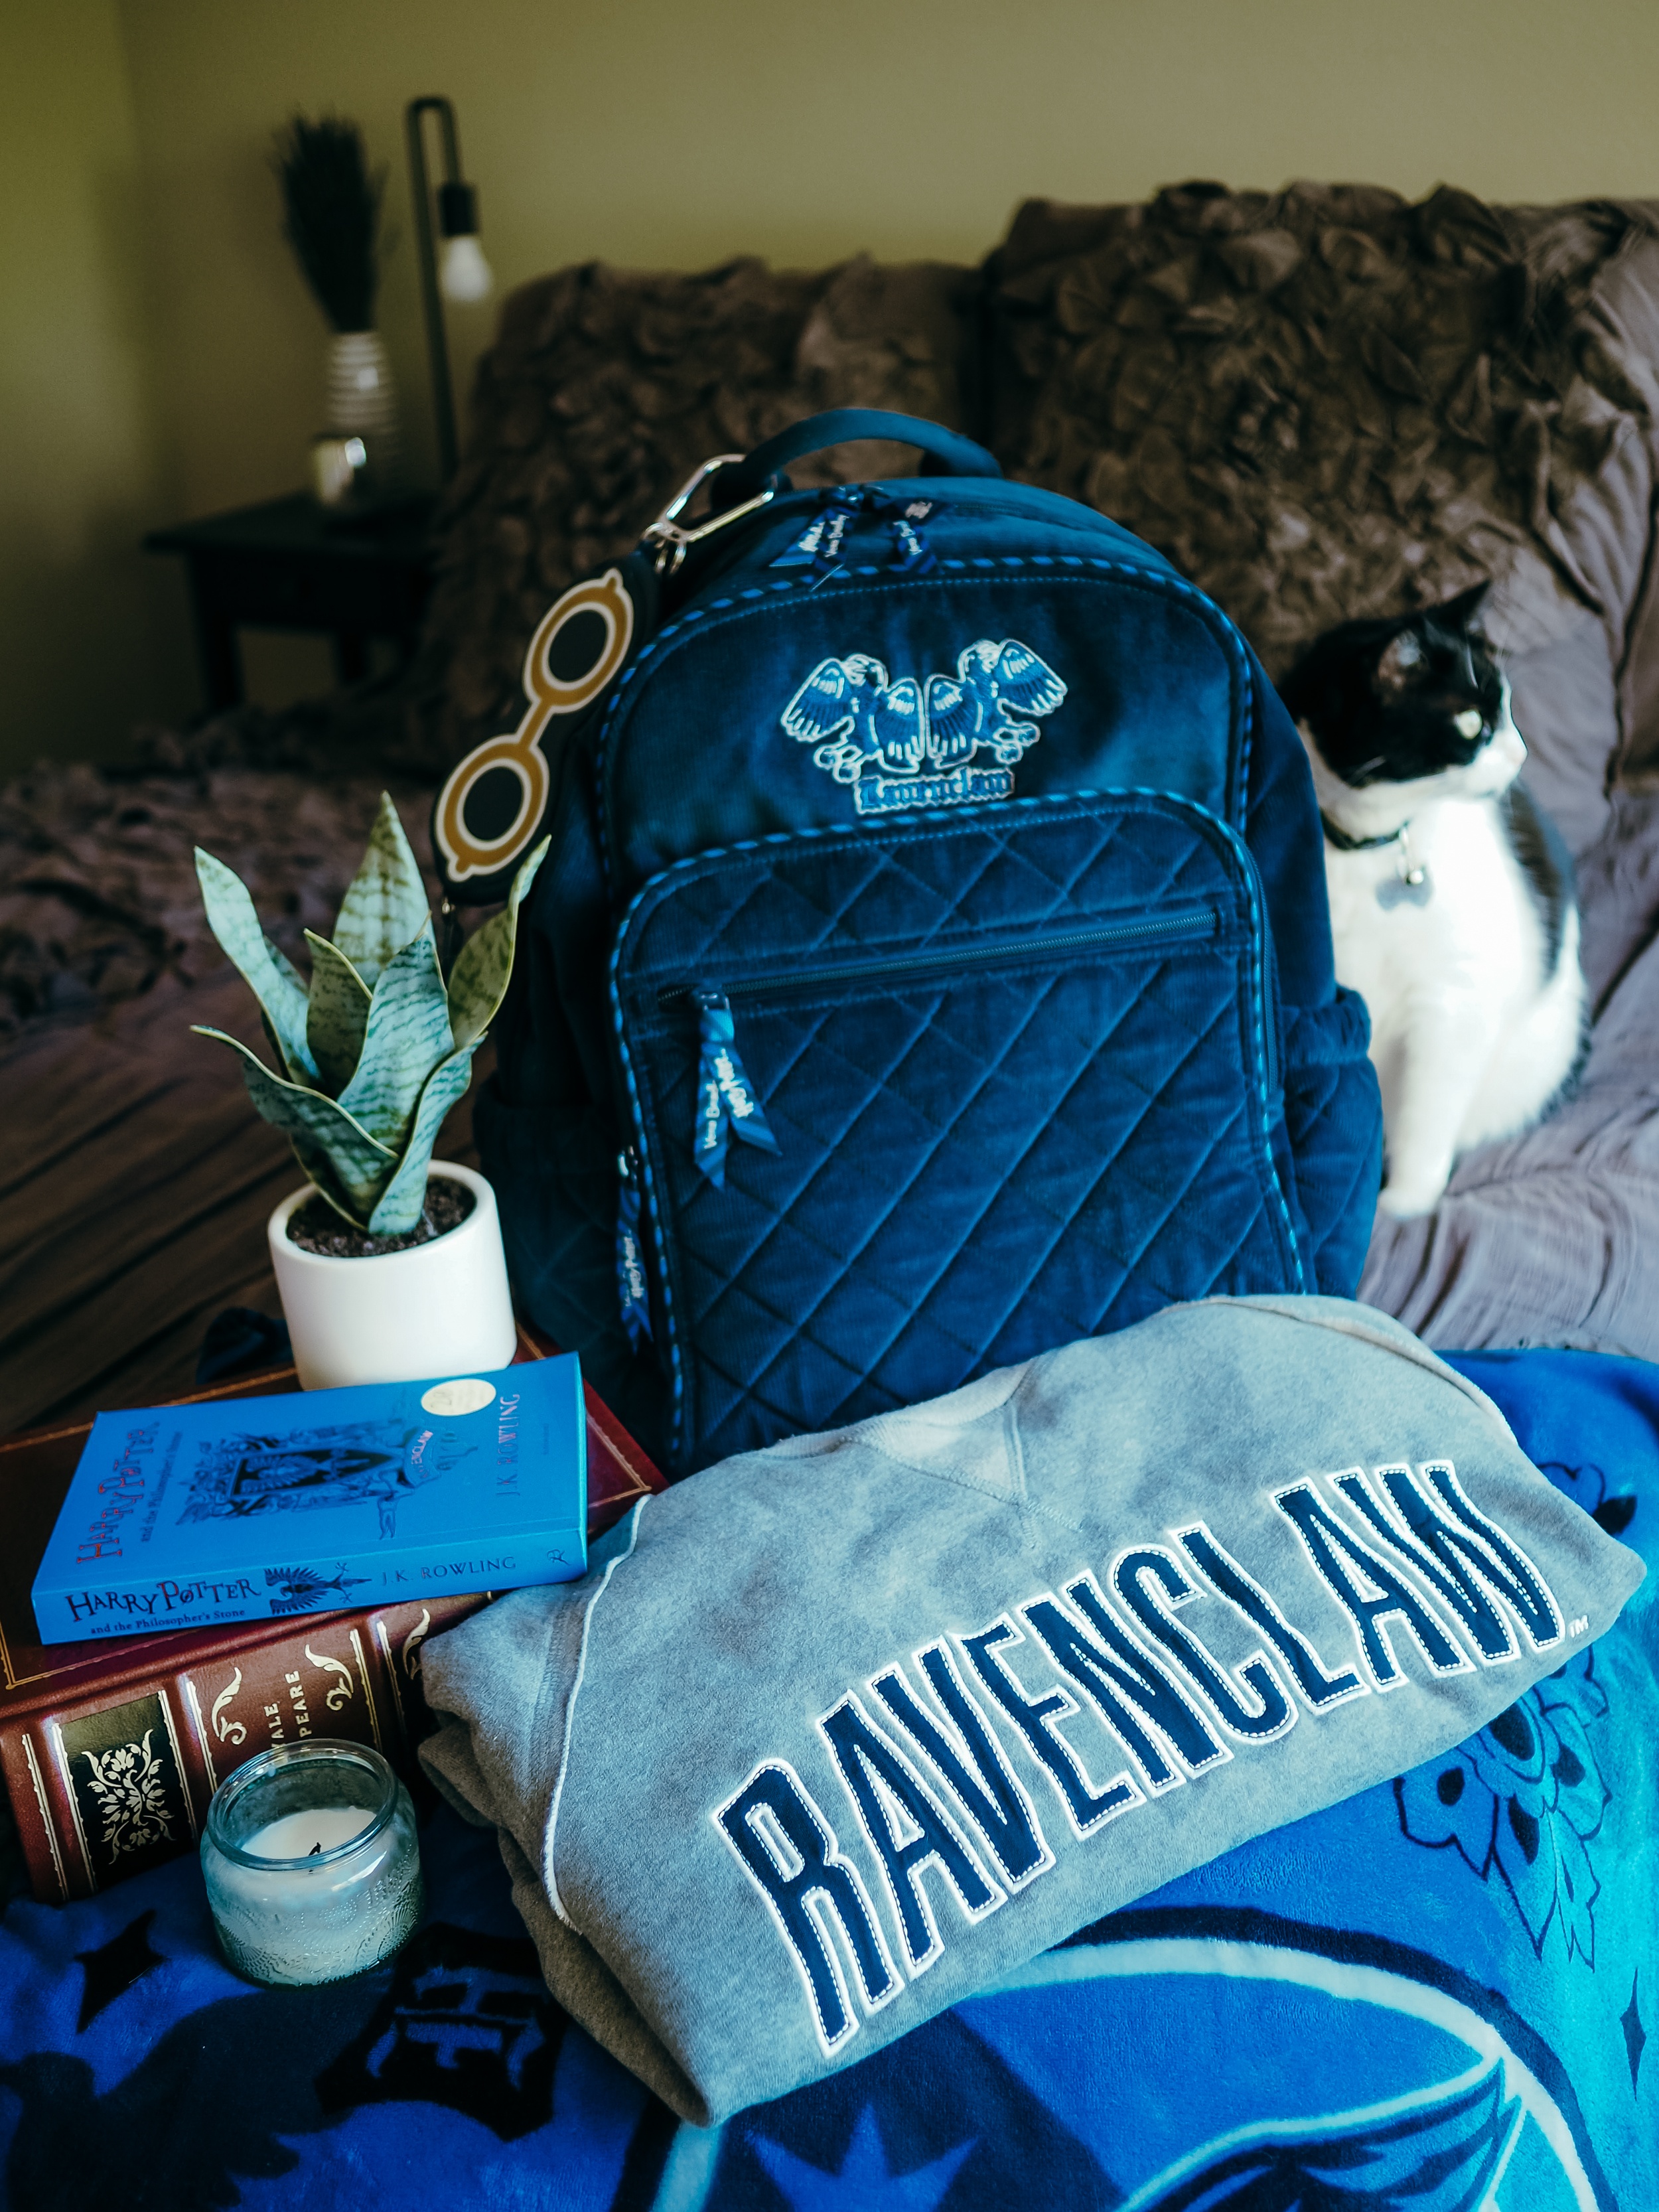 Ravenclaw aesthetic, but make it chic. Find out how to add some Ravenclaw aesthetic to your home, wardrobe, and life in this magical guide.